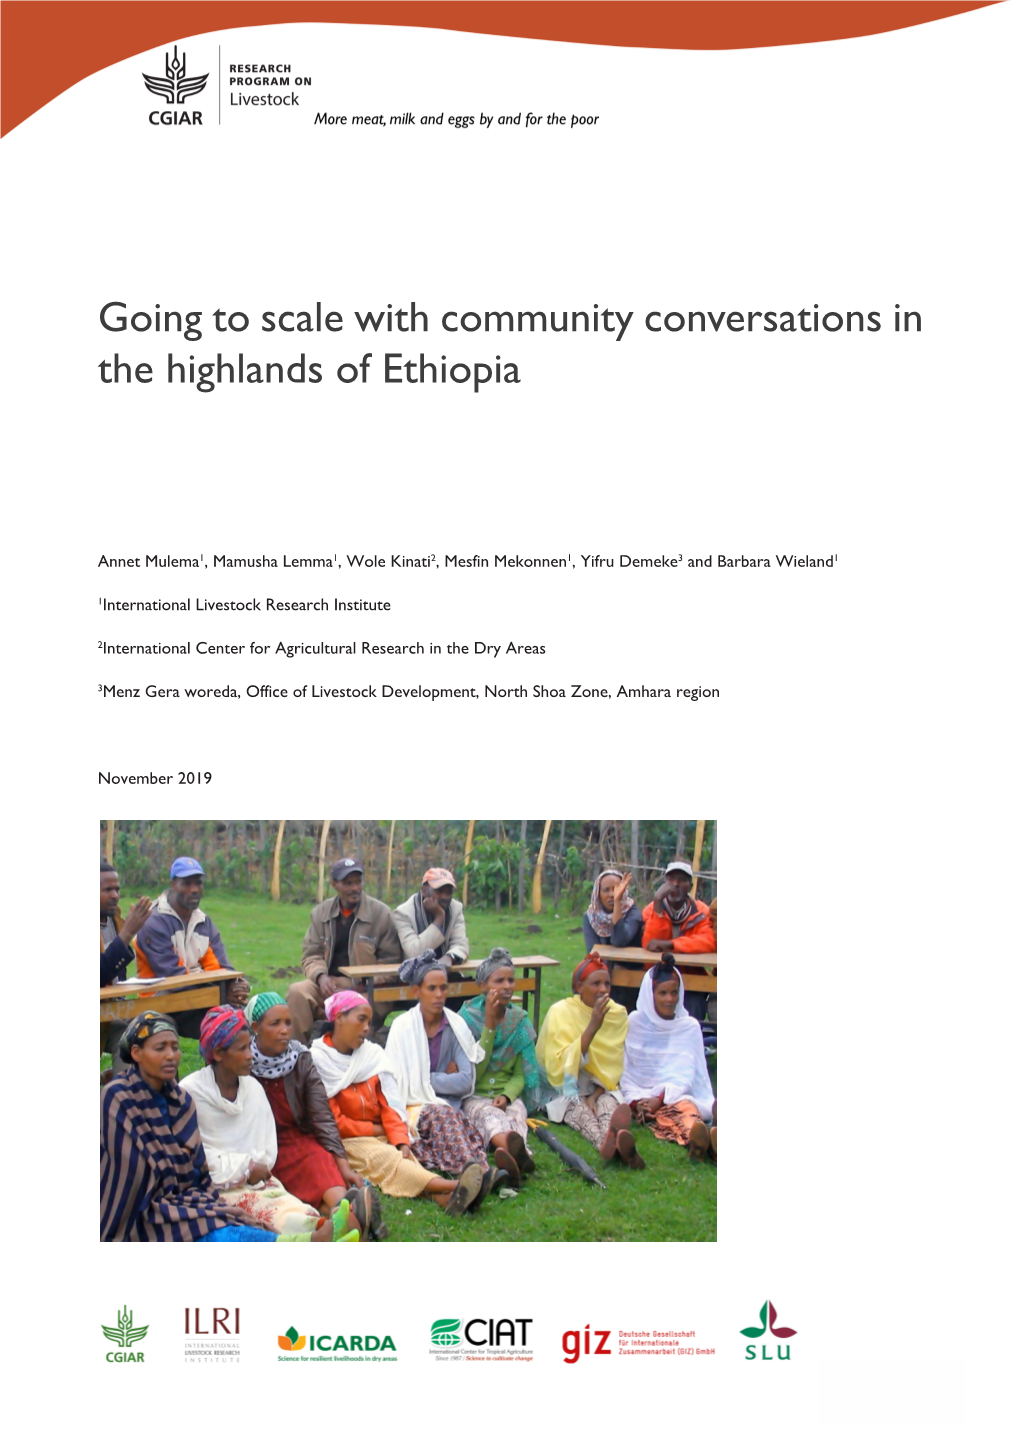 Going to Scale with Community Conversations in the Highlands of Ethiopia